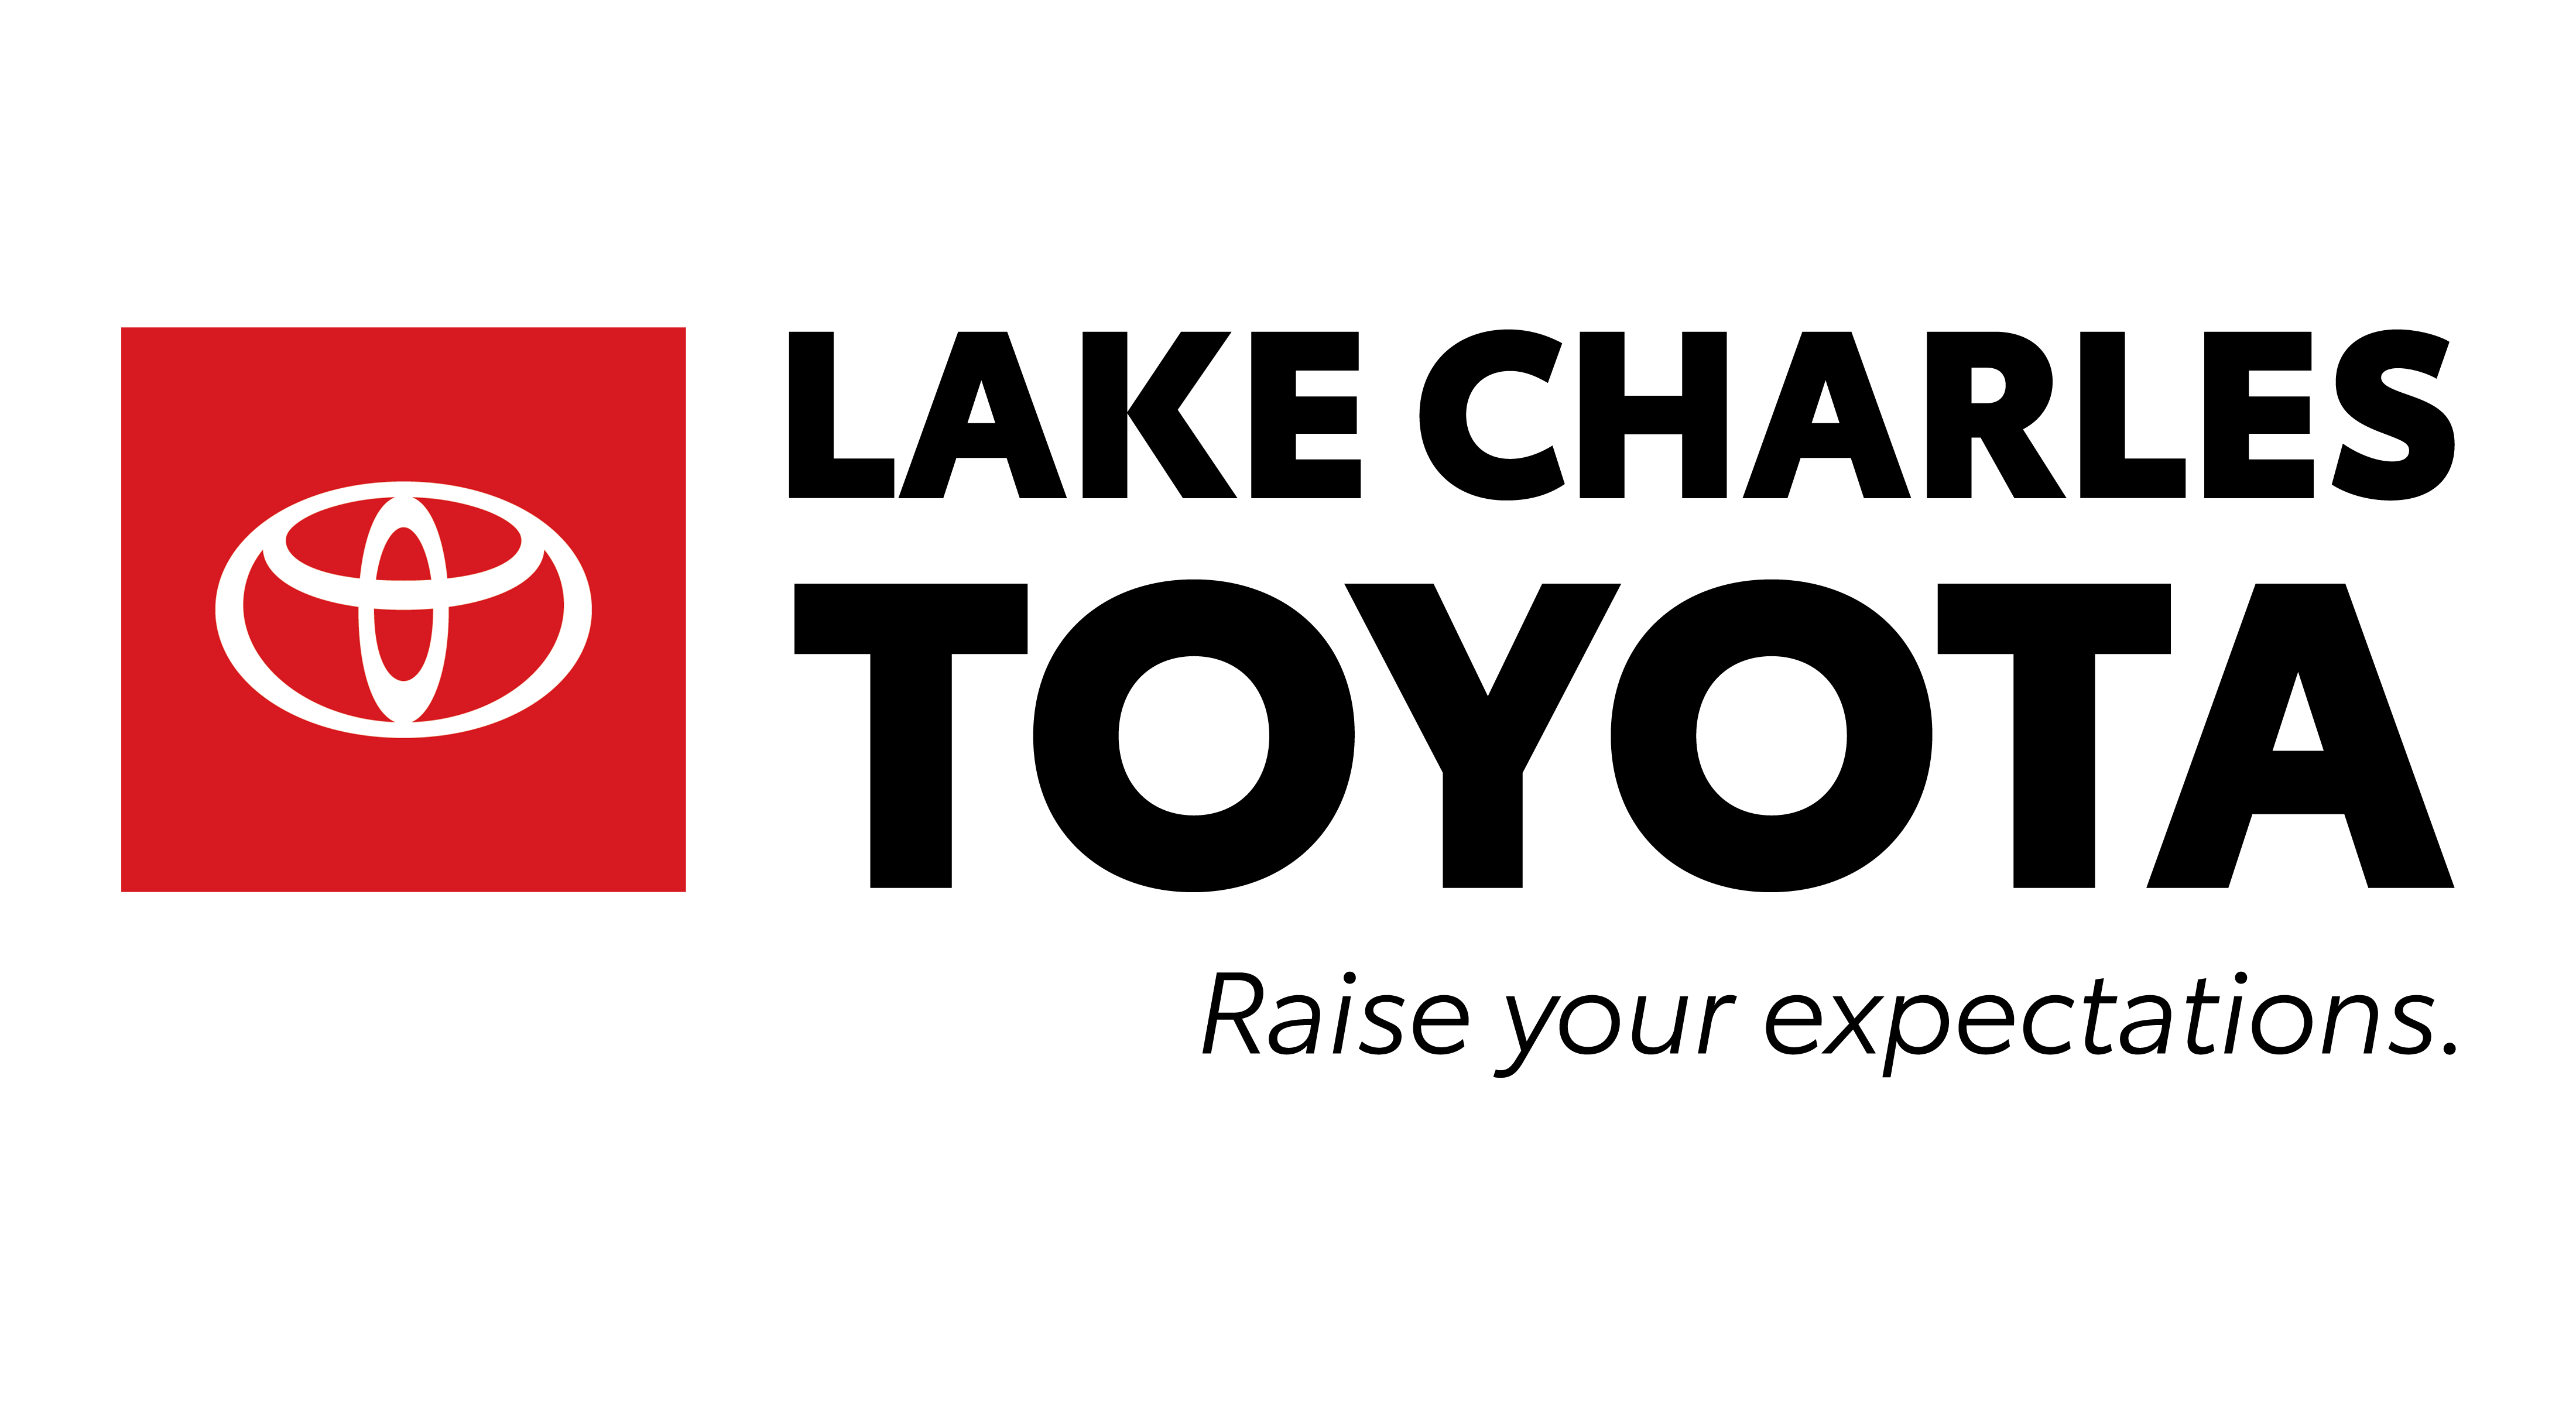 Lake Charles Toyota logo with red Toyota logo and black letters